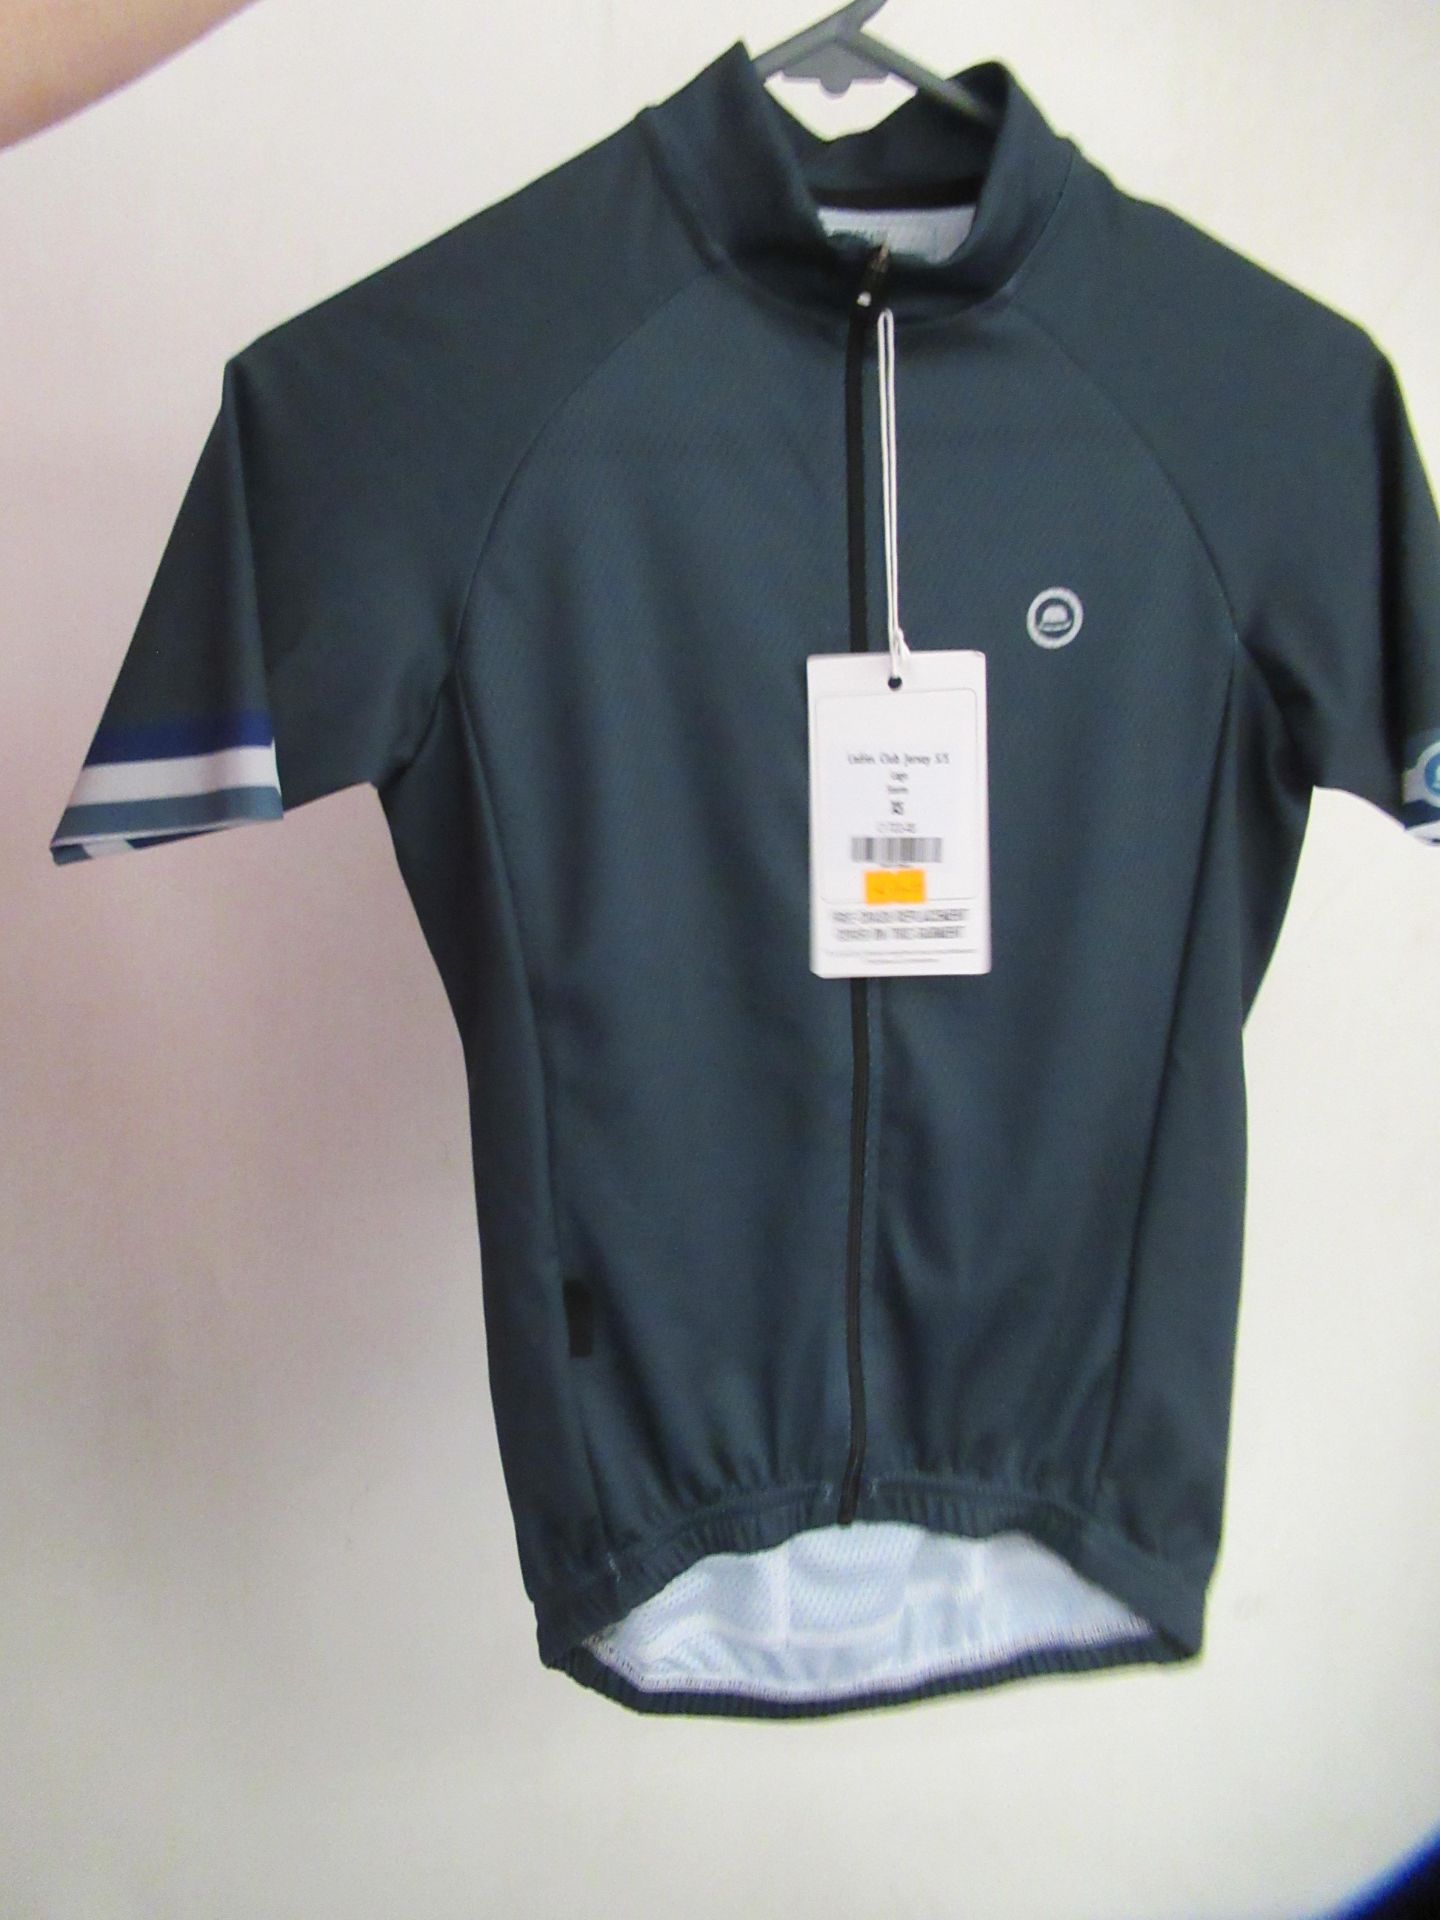 XS/S Womens Cycling Clothes - Image 10 of 10